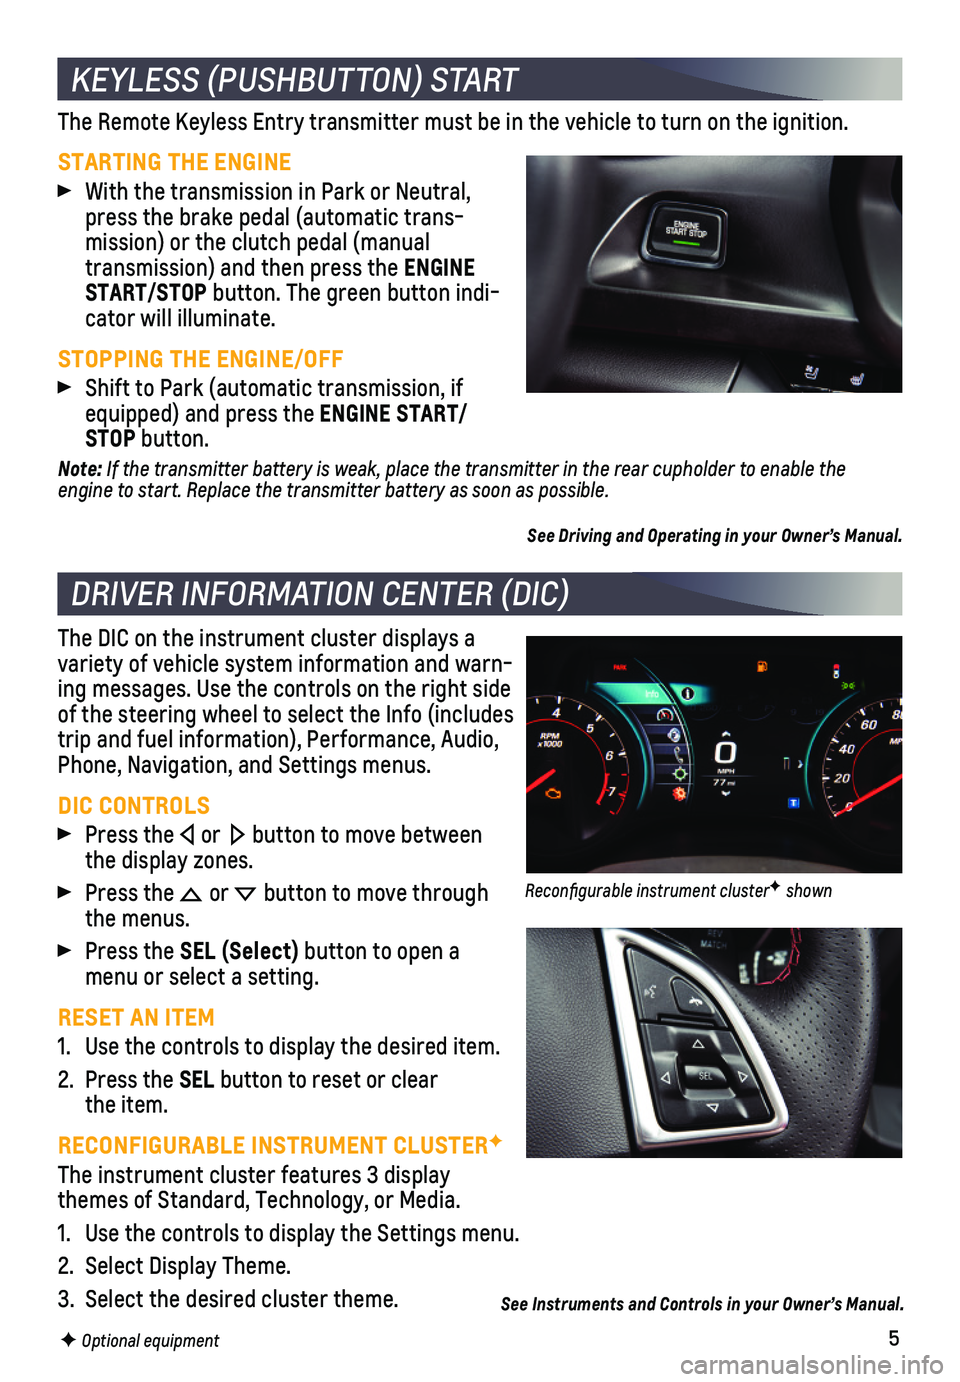 CHEVROLET CAMARO 2018  Get To Know Guide 5
The Remote Keyless Entry transmitter must be in the vehicle to turn on t\
he ignition.
STARTING THE ENGINE
 With the transmission in Park or Neutral, press the brake pedal (automatic trans-mission) 